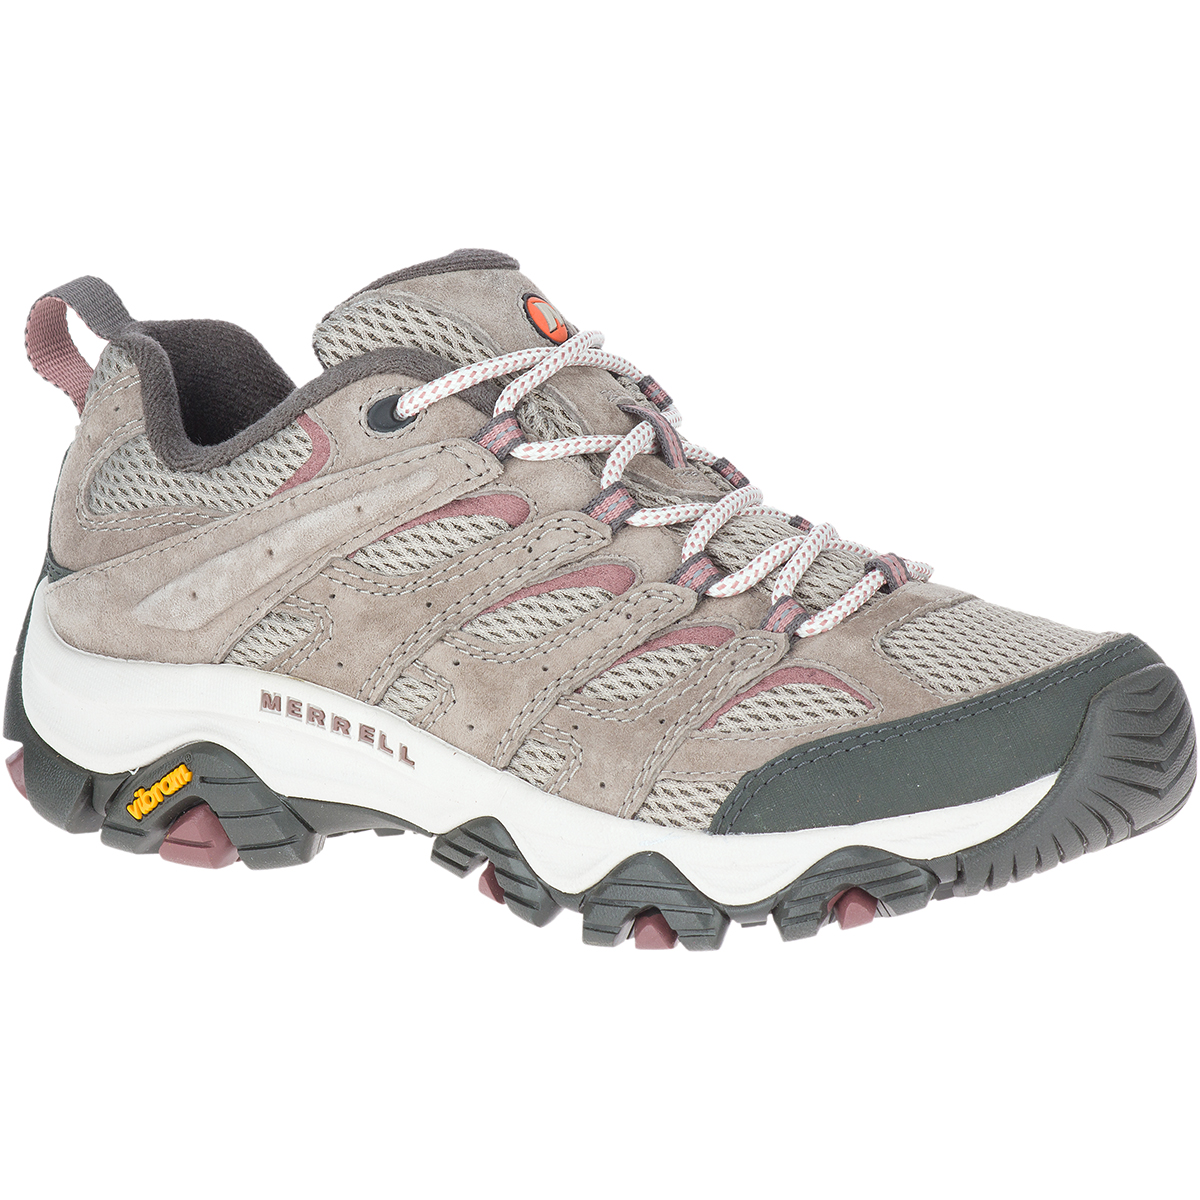 Merrell Women's Moab 3 Hiking Shoes, Wide - Size 8.5